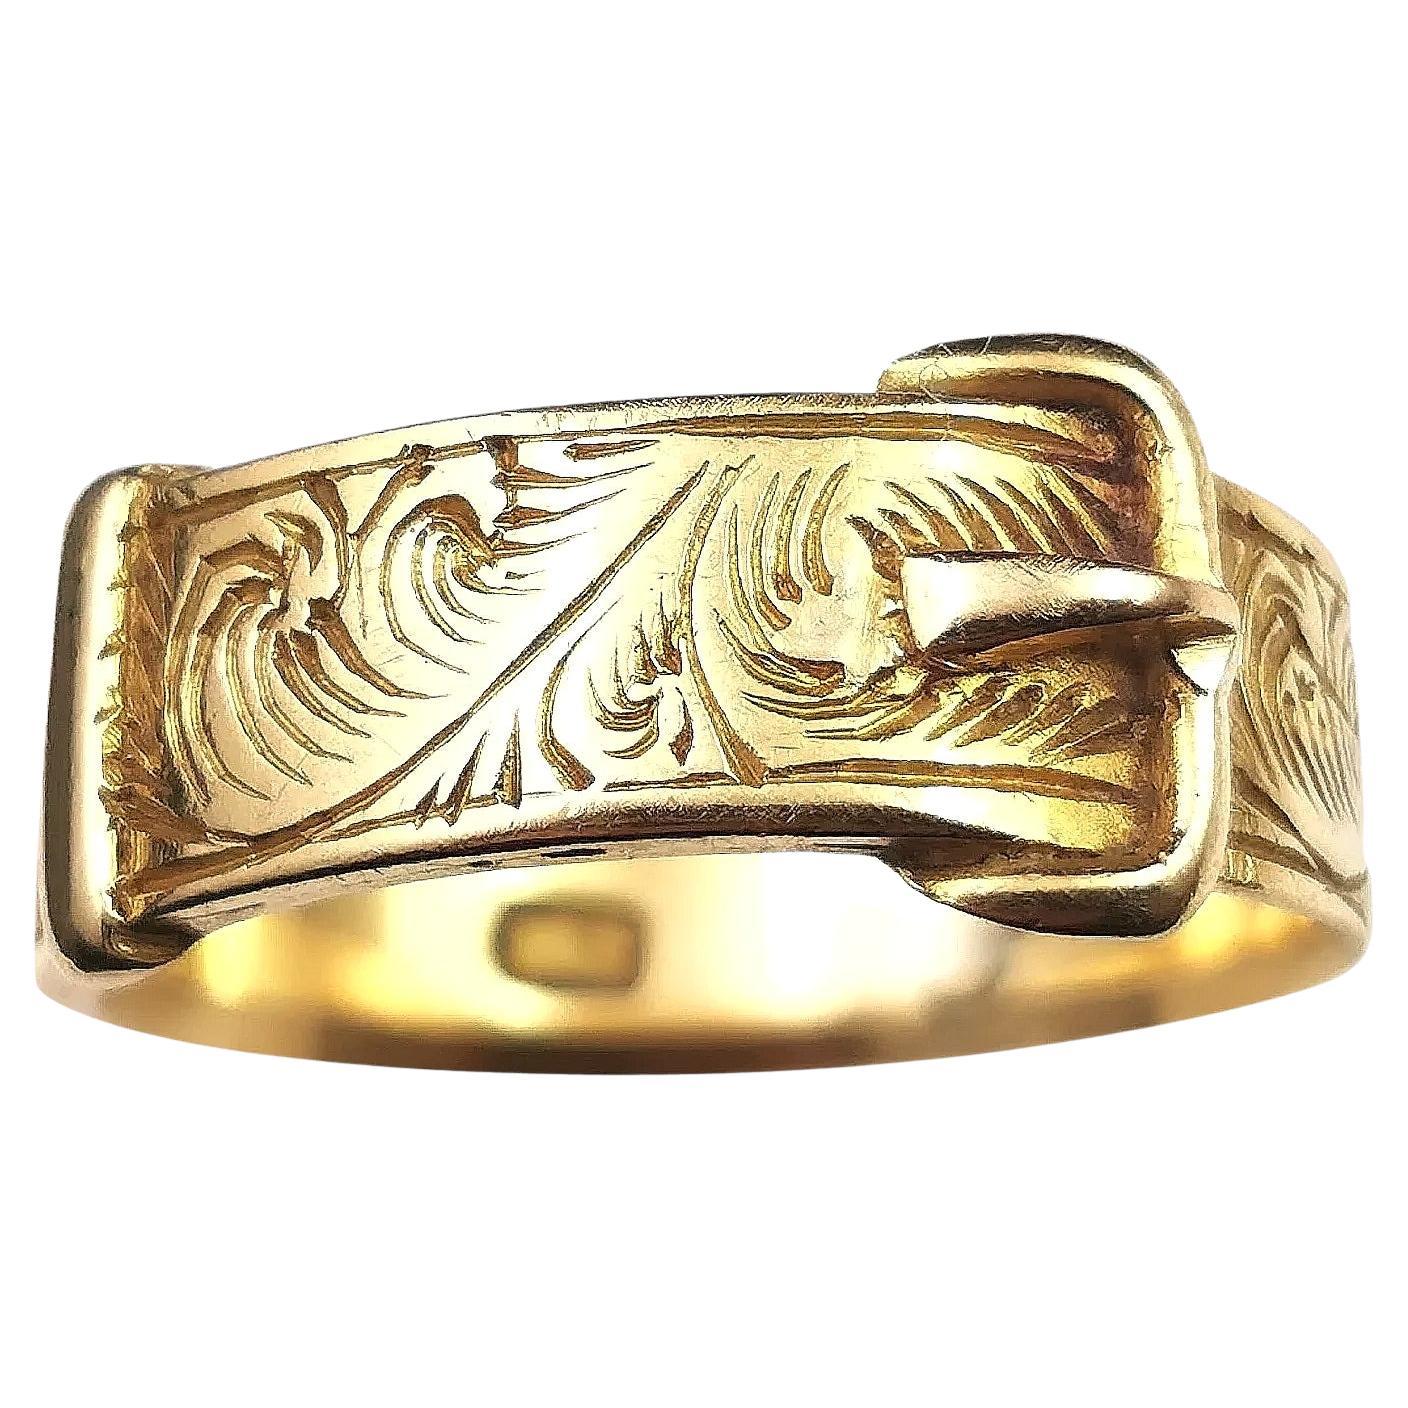 Antique 18k Gold Buckle Ring, Engraved Band